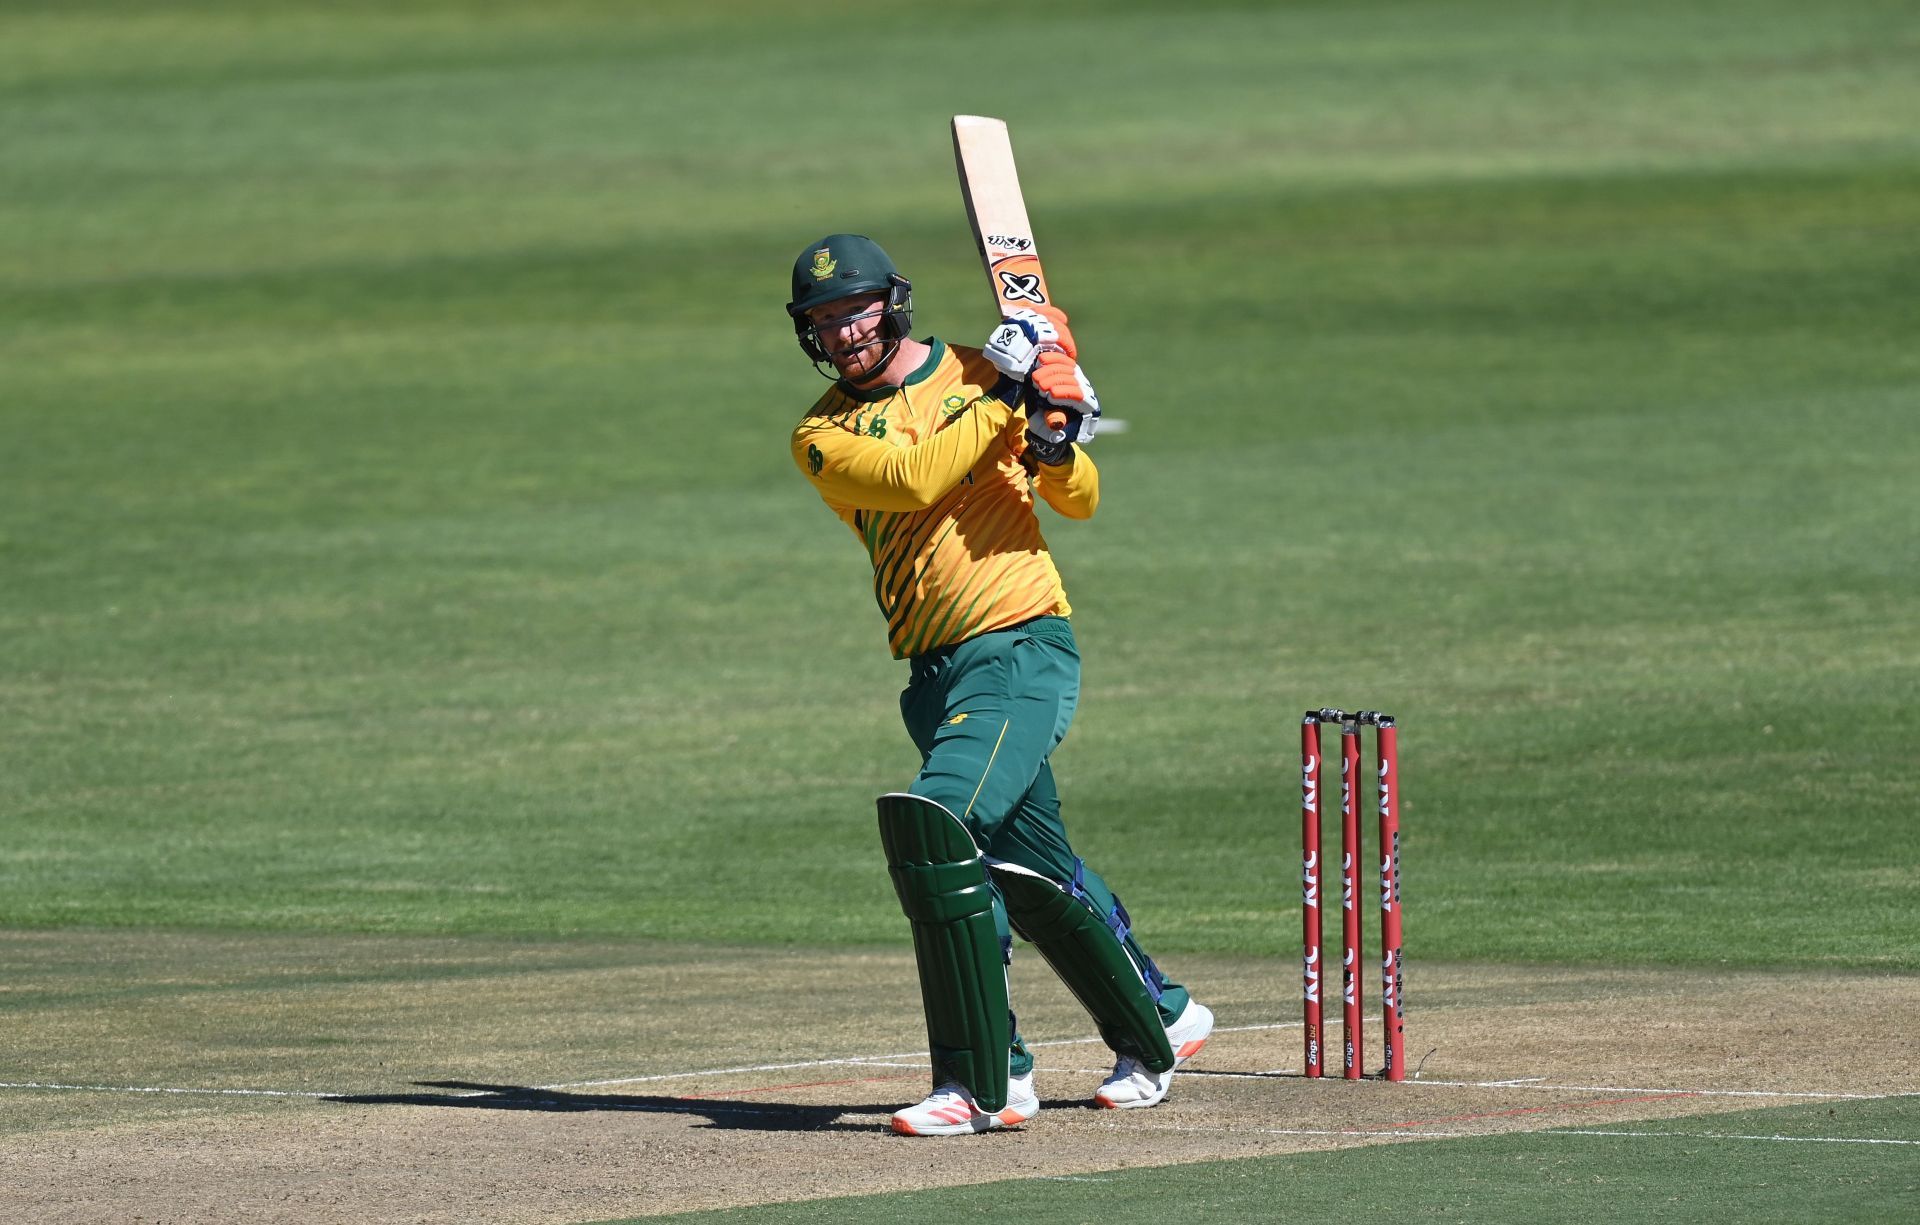 Heinrich Klaasen will lead South Africa A against Zimbabwe XI.